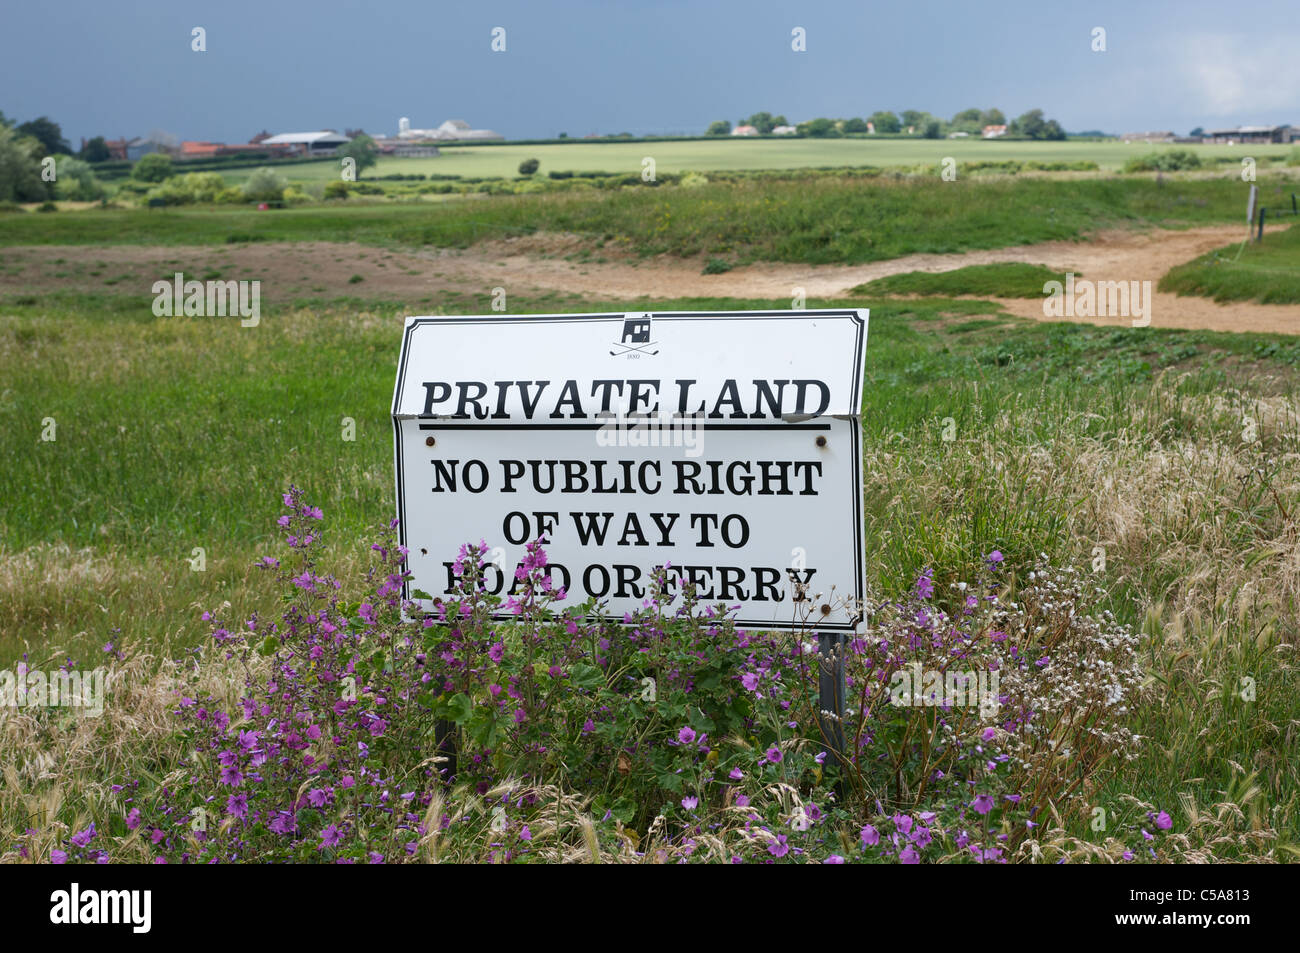 Private Land no public right of way sign Stock Photo